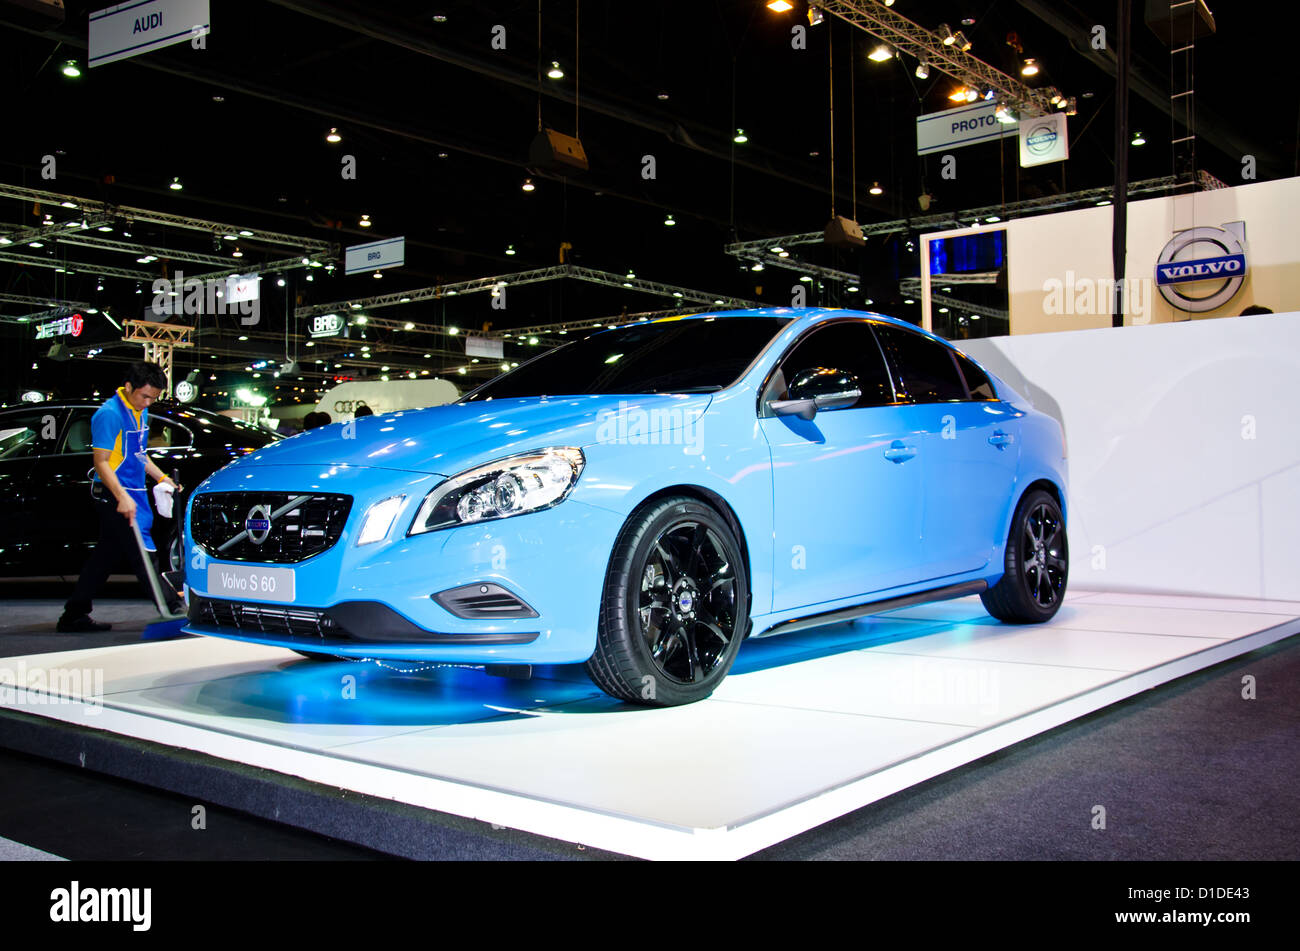 Volvo S 60 car on display at The 29th Thailand International Motor Expo Stock Photo